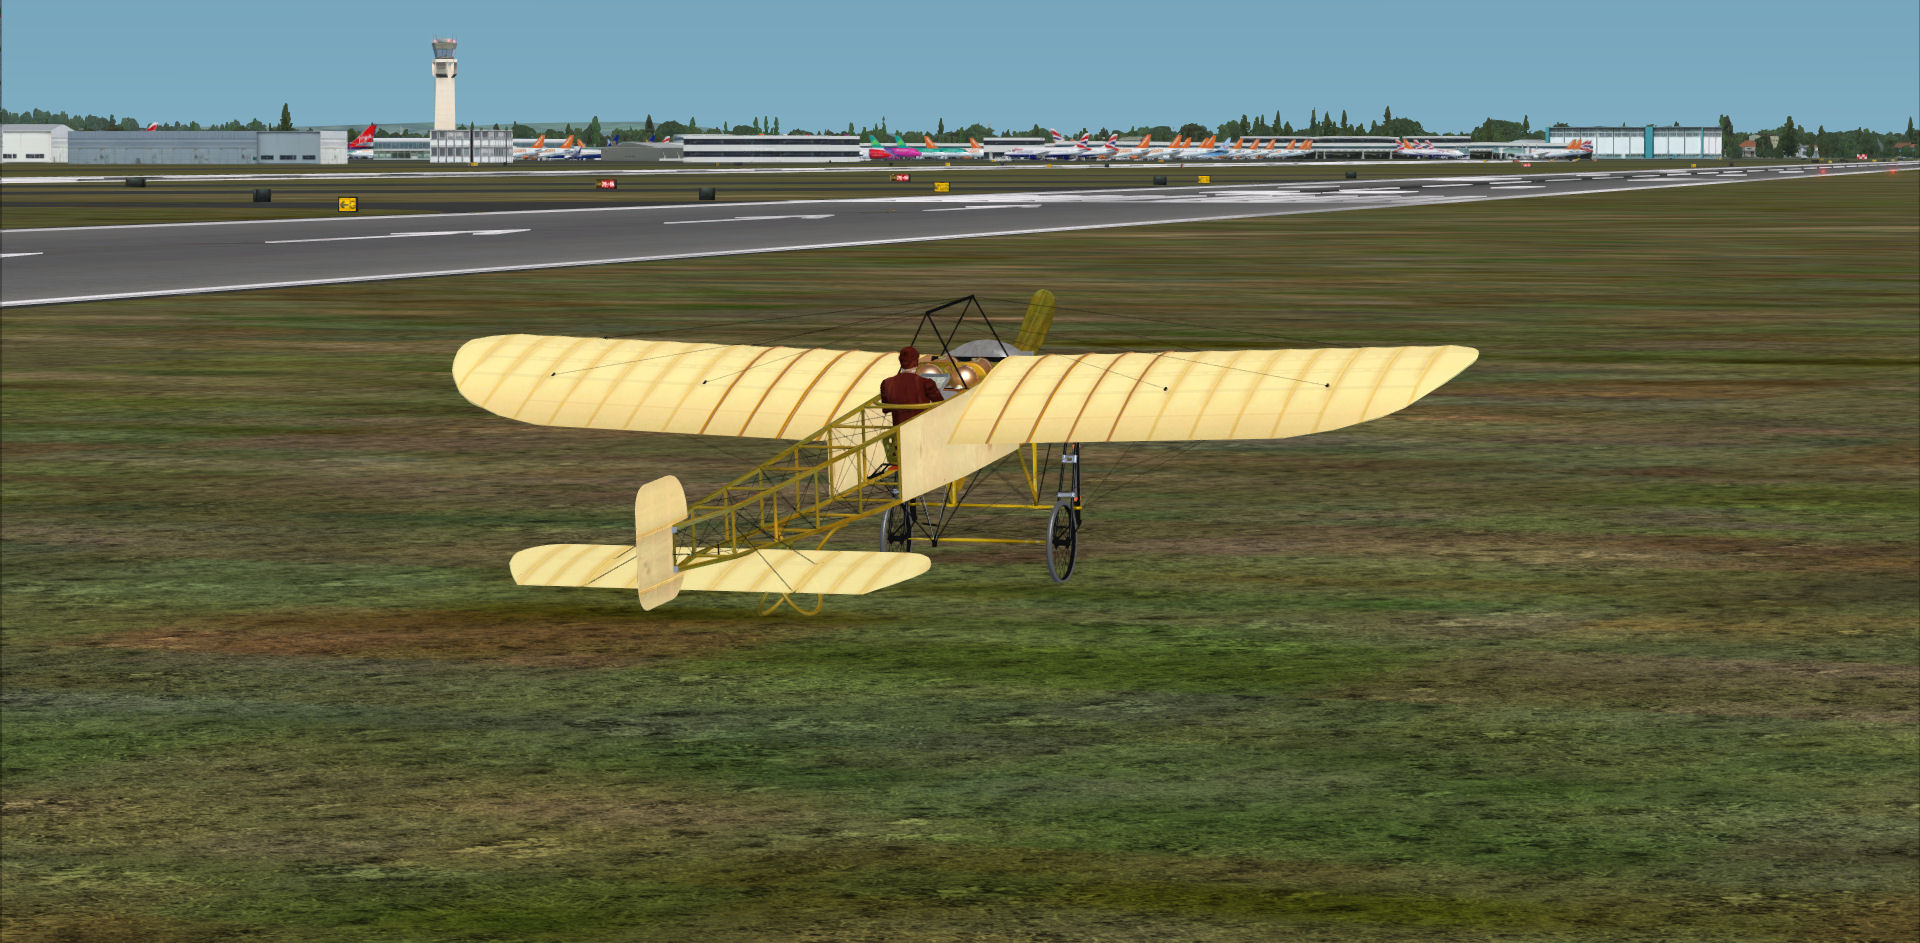 Getting ready to depart Gatwick (EGKK) for August DOTM in the Bleriot XI